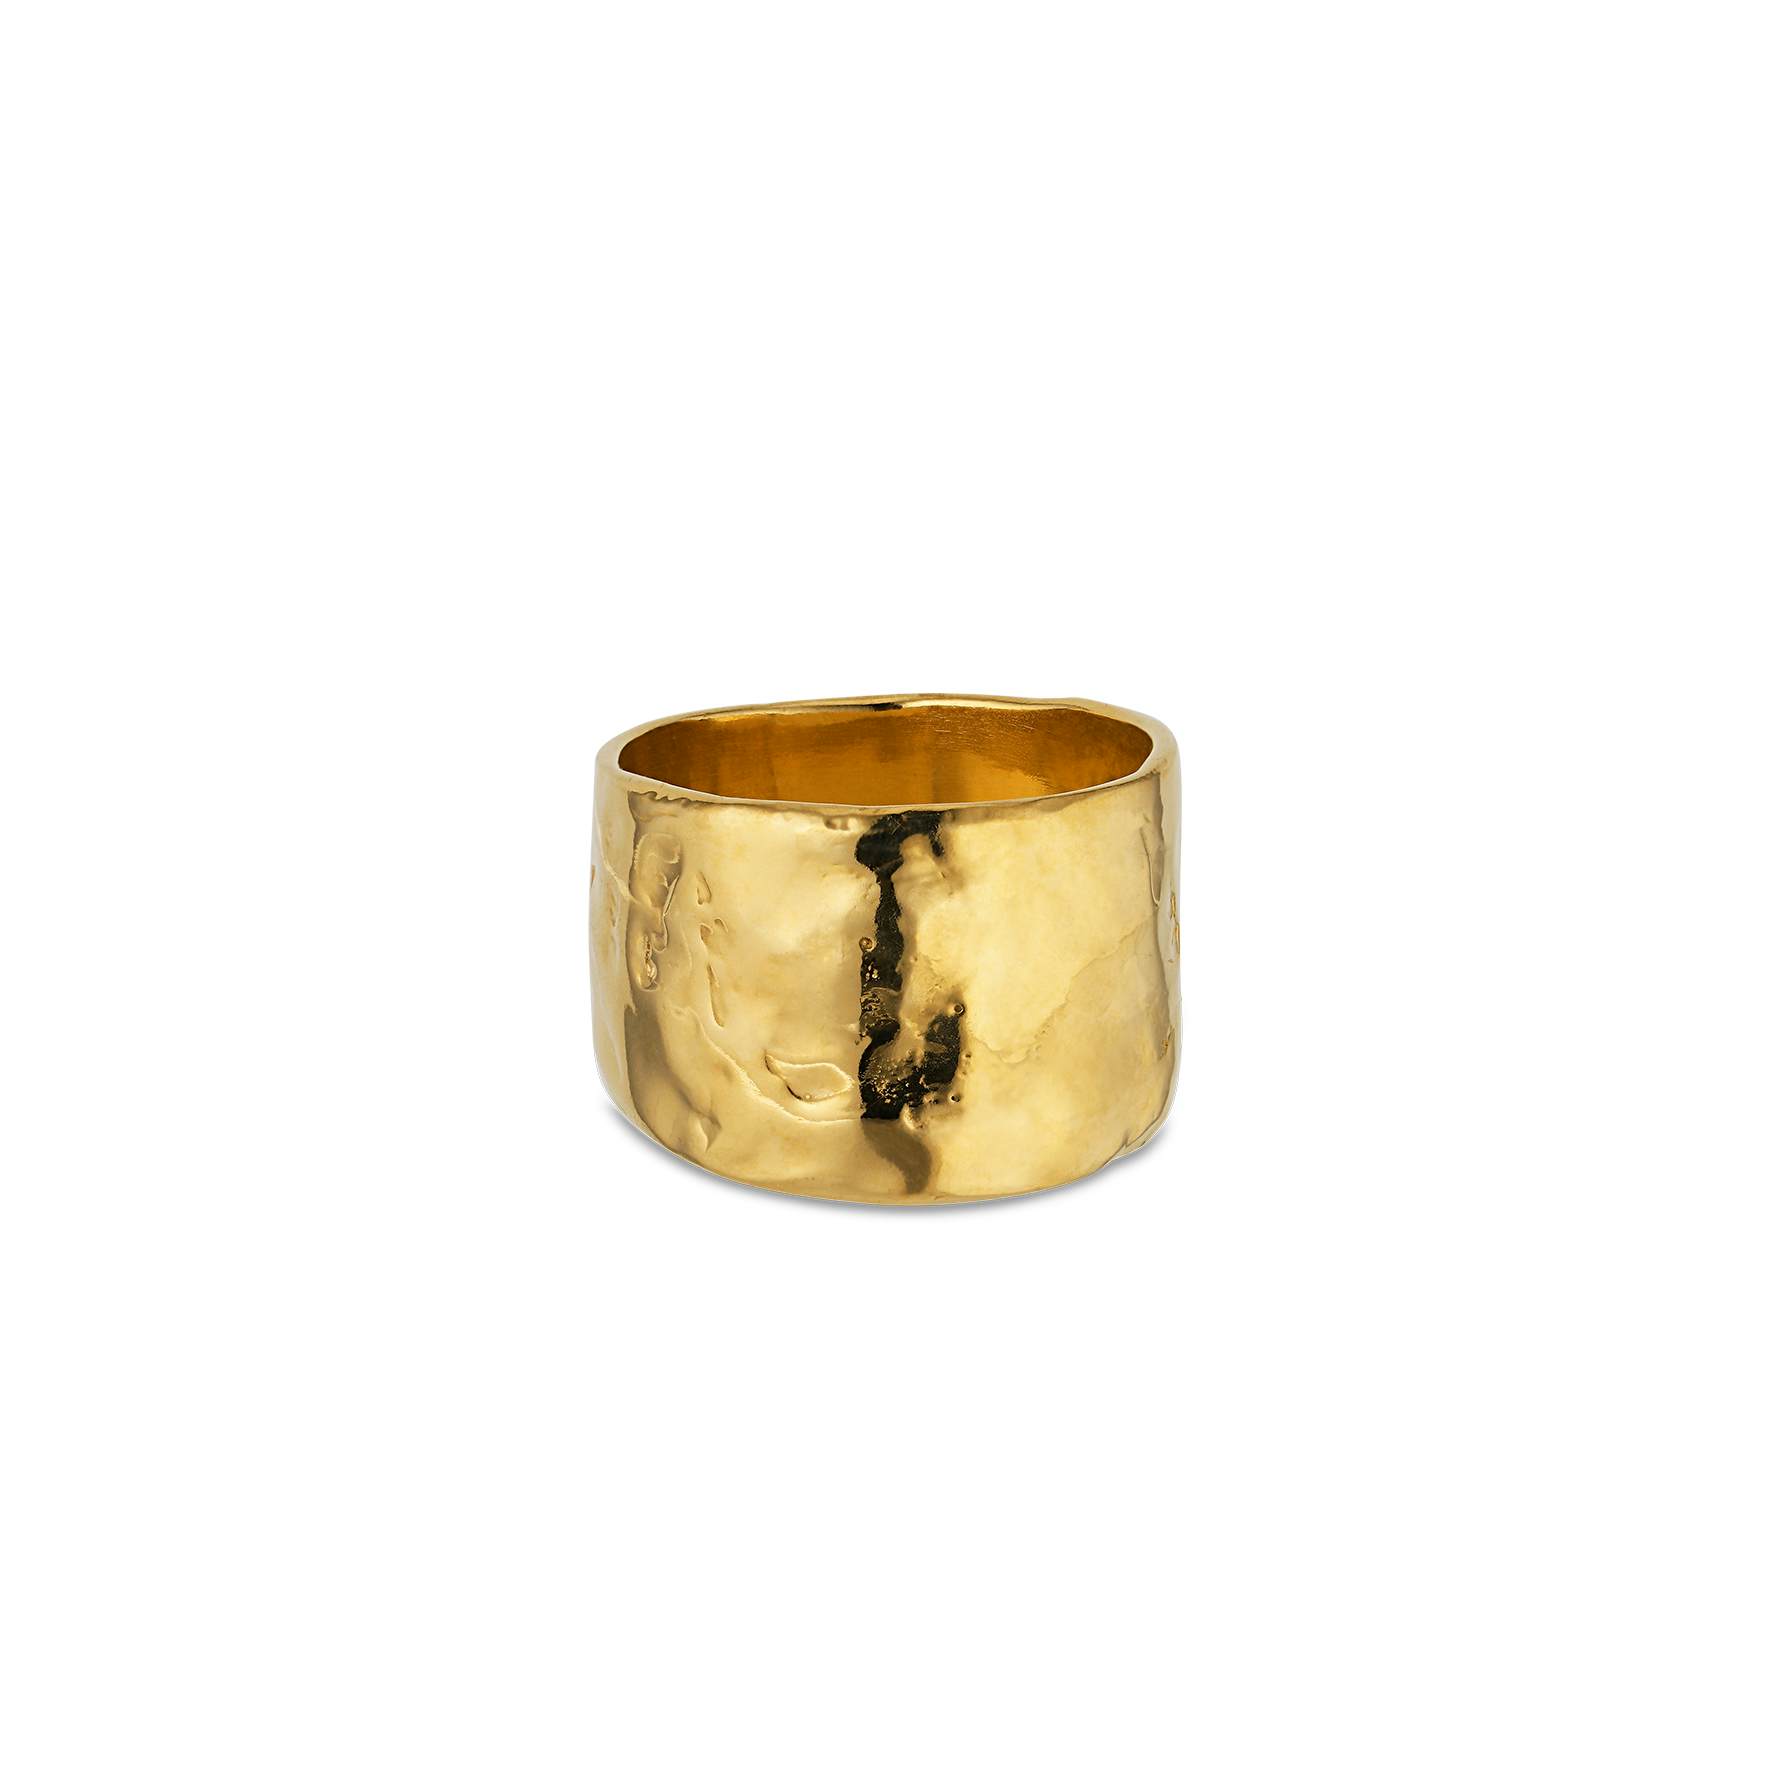 Big Bruised Heart Ring from Jane Kønig in Goldplated-Silver Sterling 925